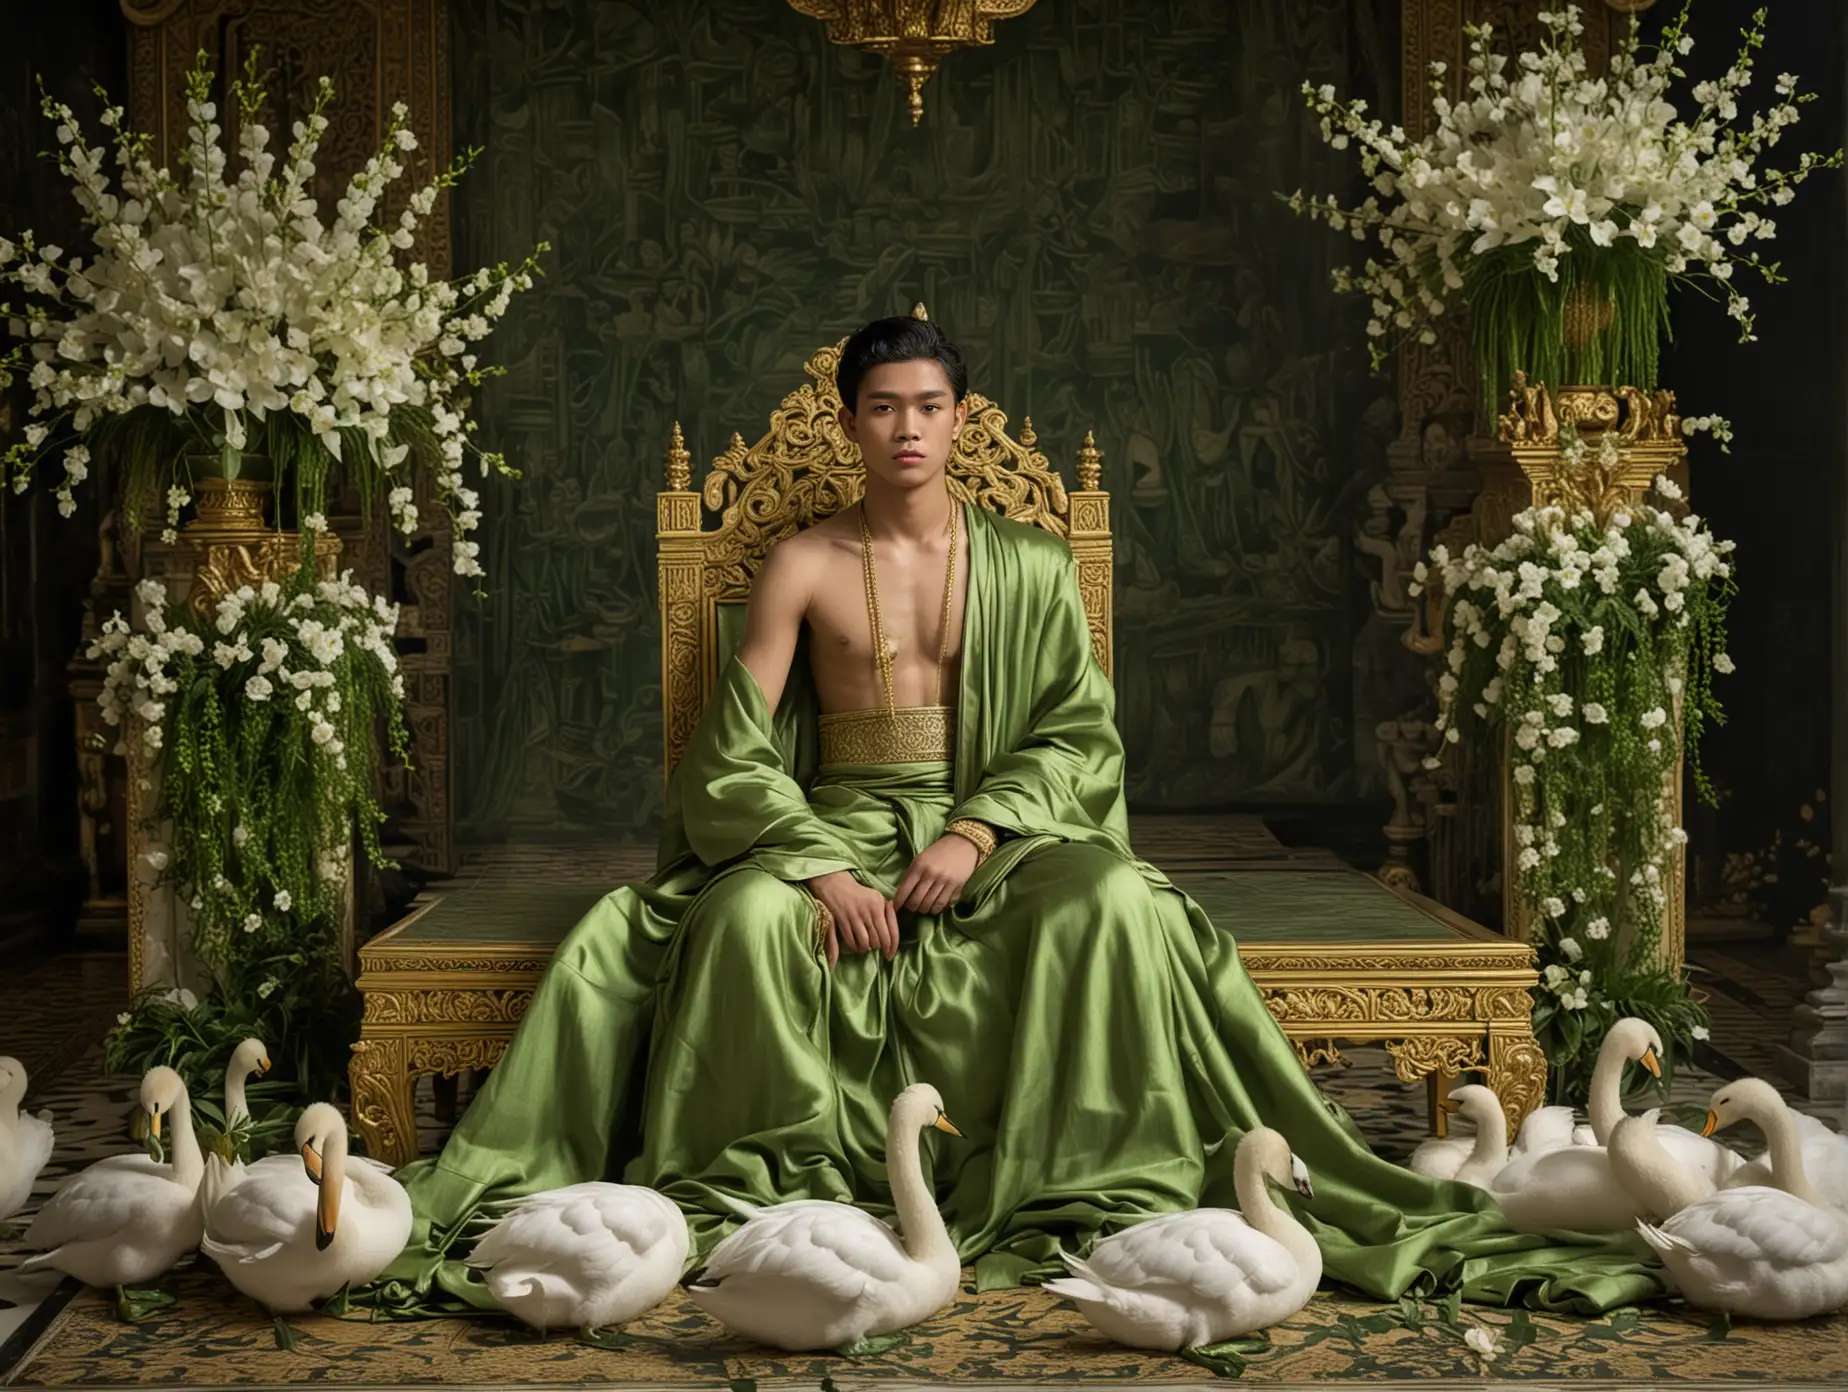 Indonesian-Teen-King-on-Golden-Throne-Surrounded-by-Swans-and-Jasmine-in-Nighttime-Temple